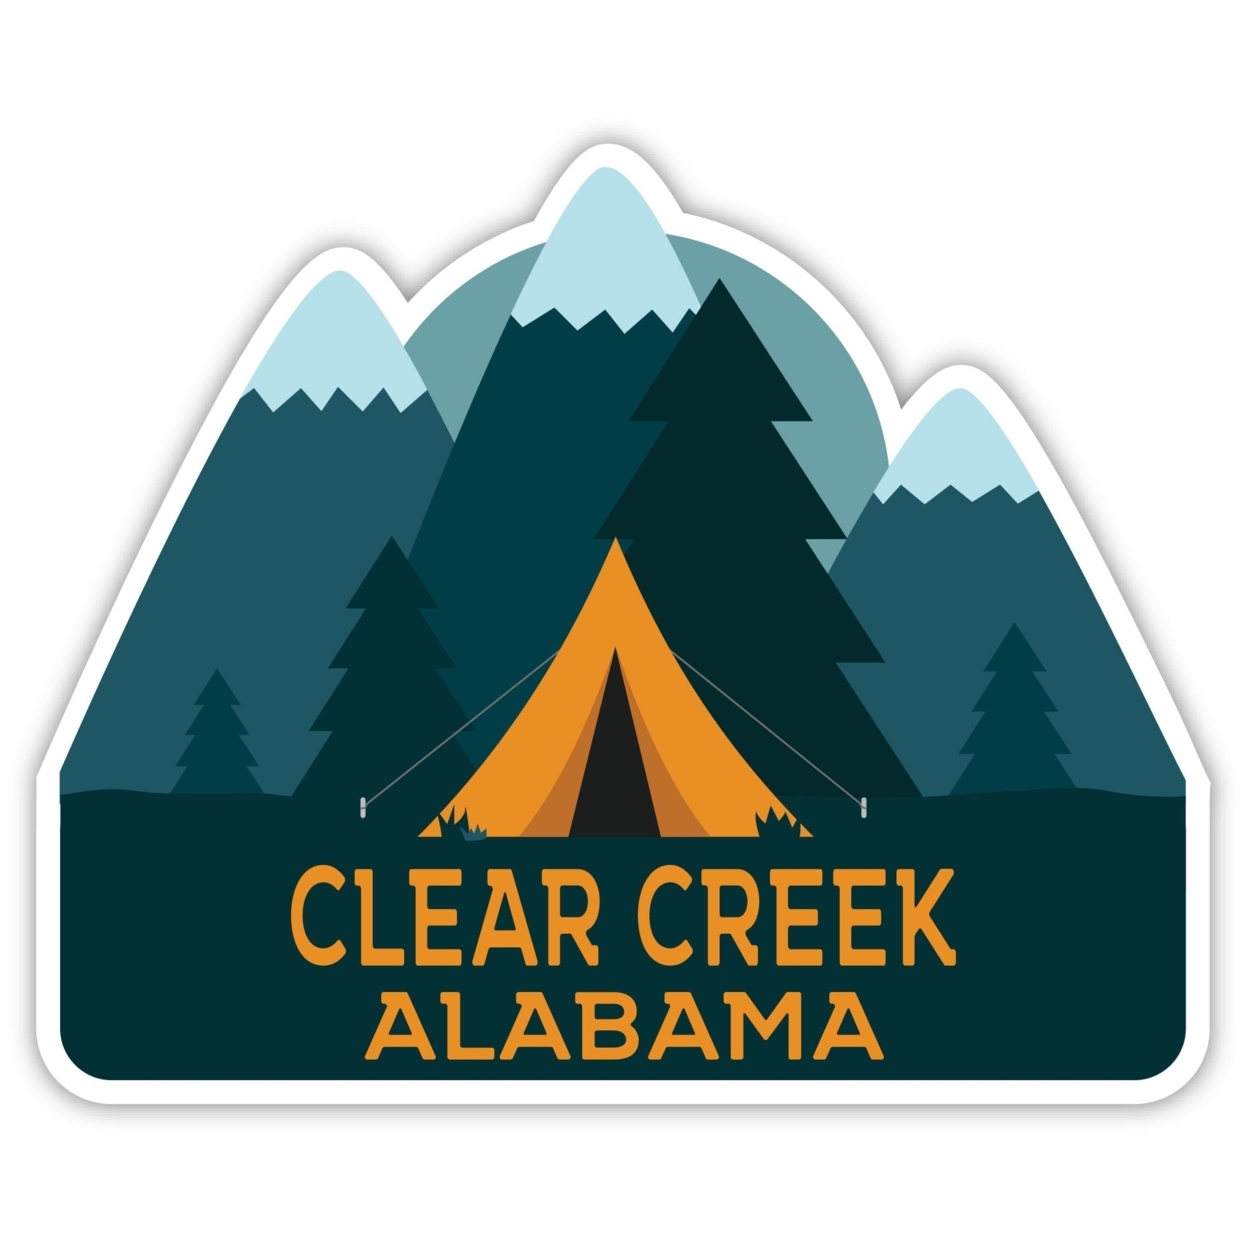 Clear Creek Alabama Souvenir Decorative Stickers (Choose Theme And Size) - 4-Pack, 2-Inch, Bear